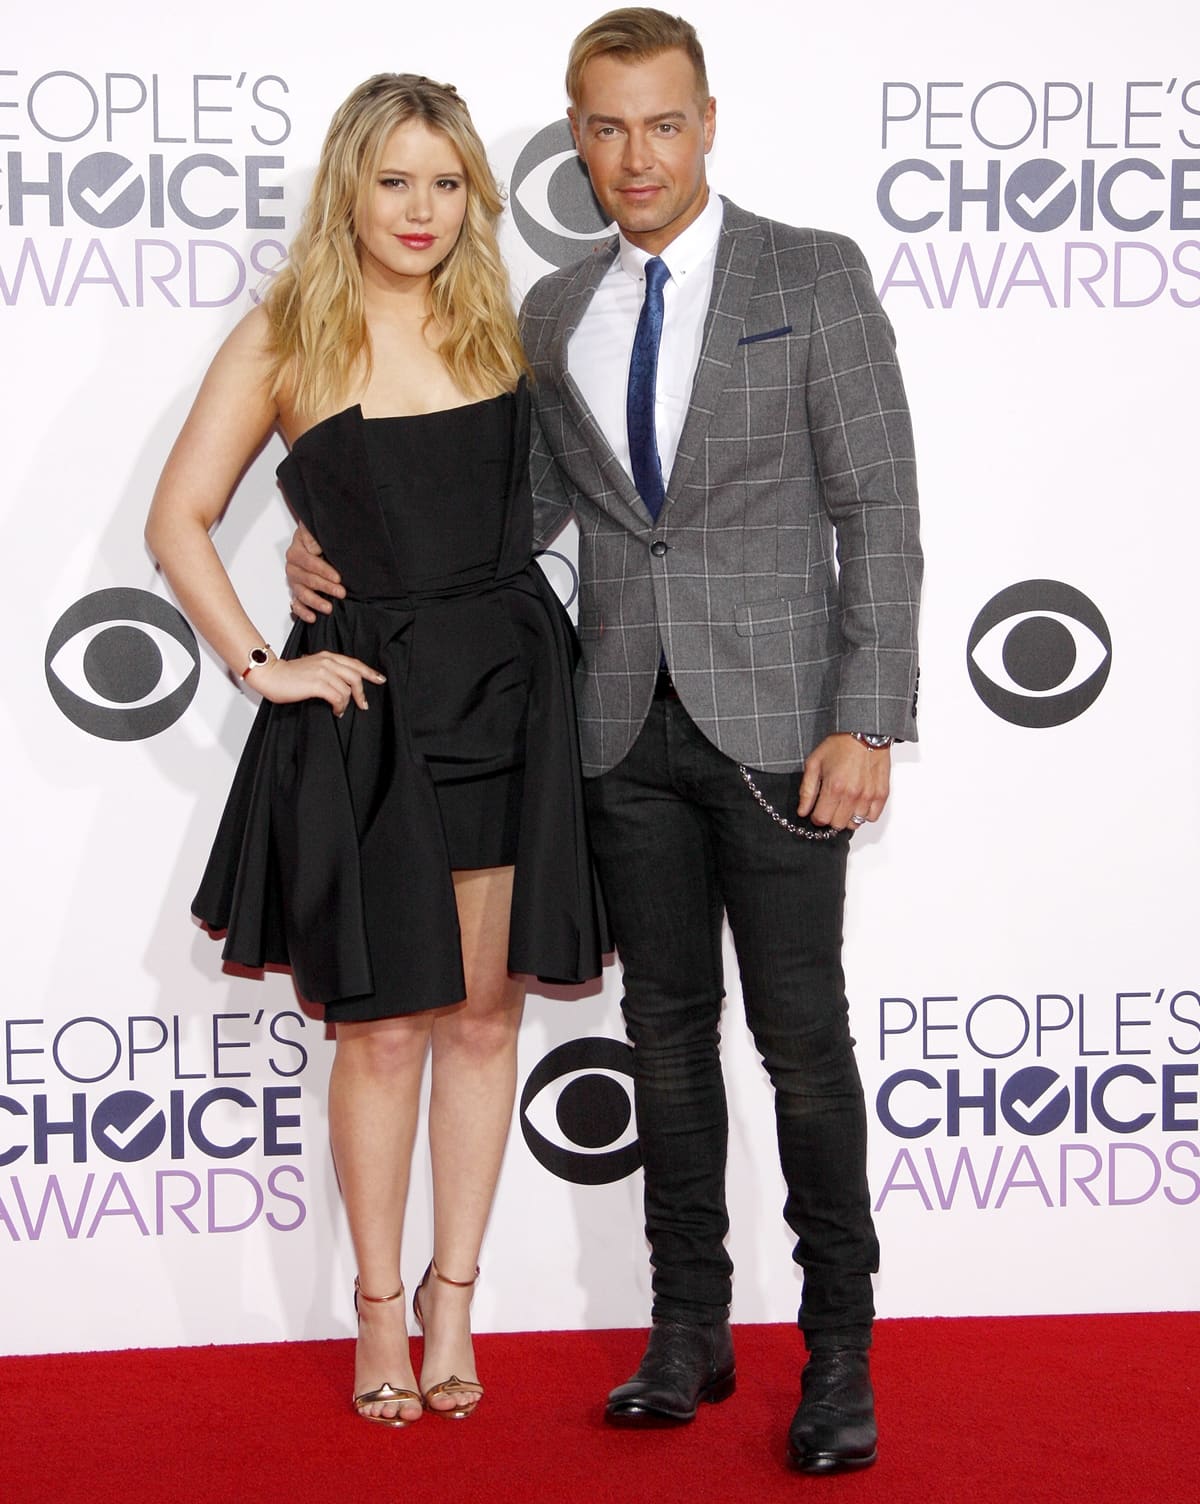 Taylor Spreitler, standing at 5 feet 2 ¼ inches (158.1 cm), is notably shorter than Joey Lawrence, who measures 5 feet 8 inches (172.7 cm), with a difference of 5.75 inches (14.6 cm) between them